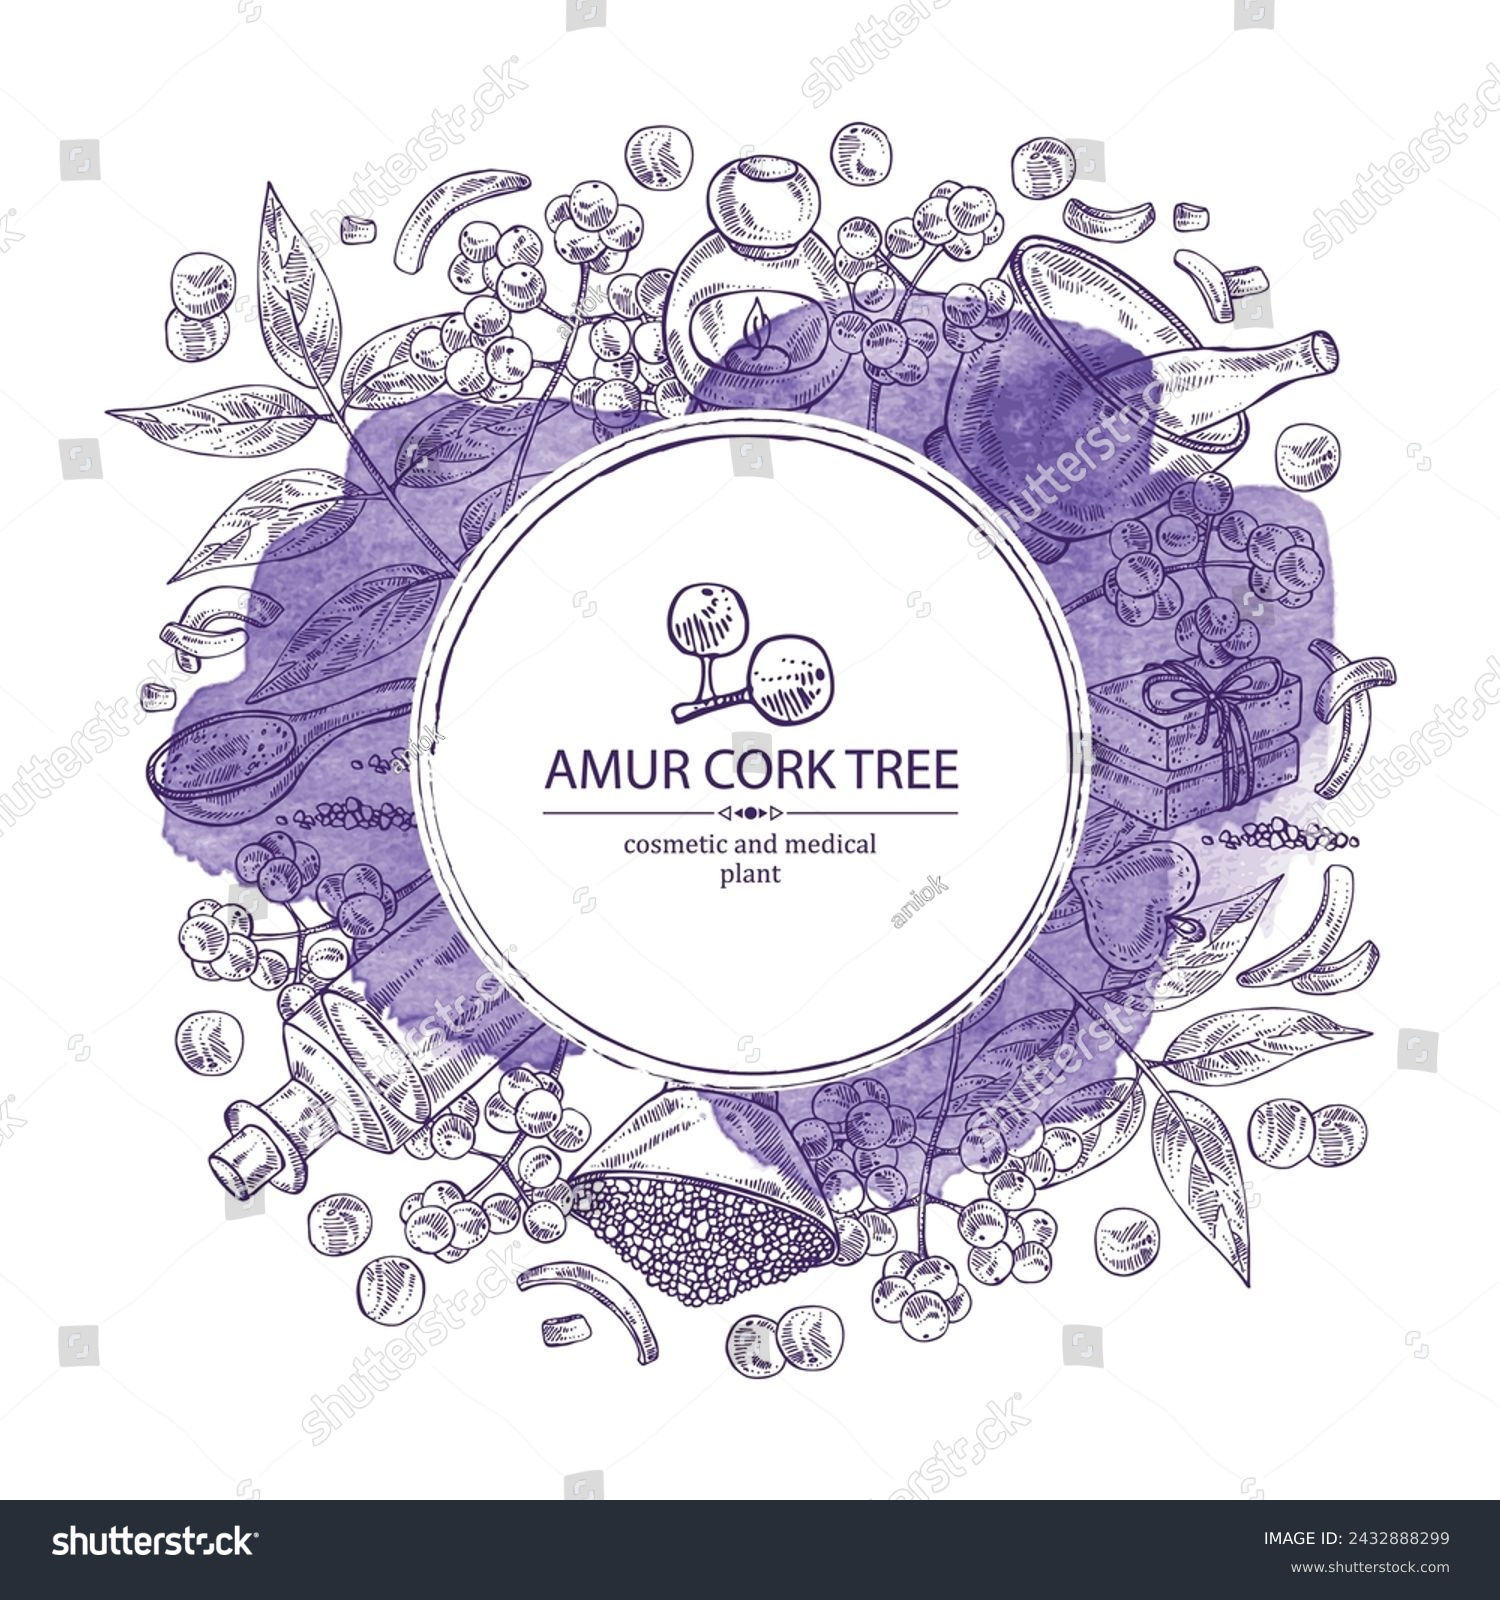 SVG of Watercolor background with  amur cork tree: amur cork berries, plant and amur cork tree bark. Phellodendron amurense. Oil, soap and bath salt . Cosmetics and medical plant. Vector hand drawn illustrat svg